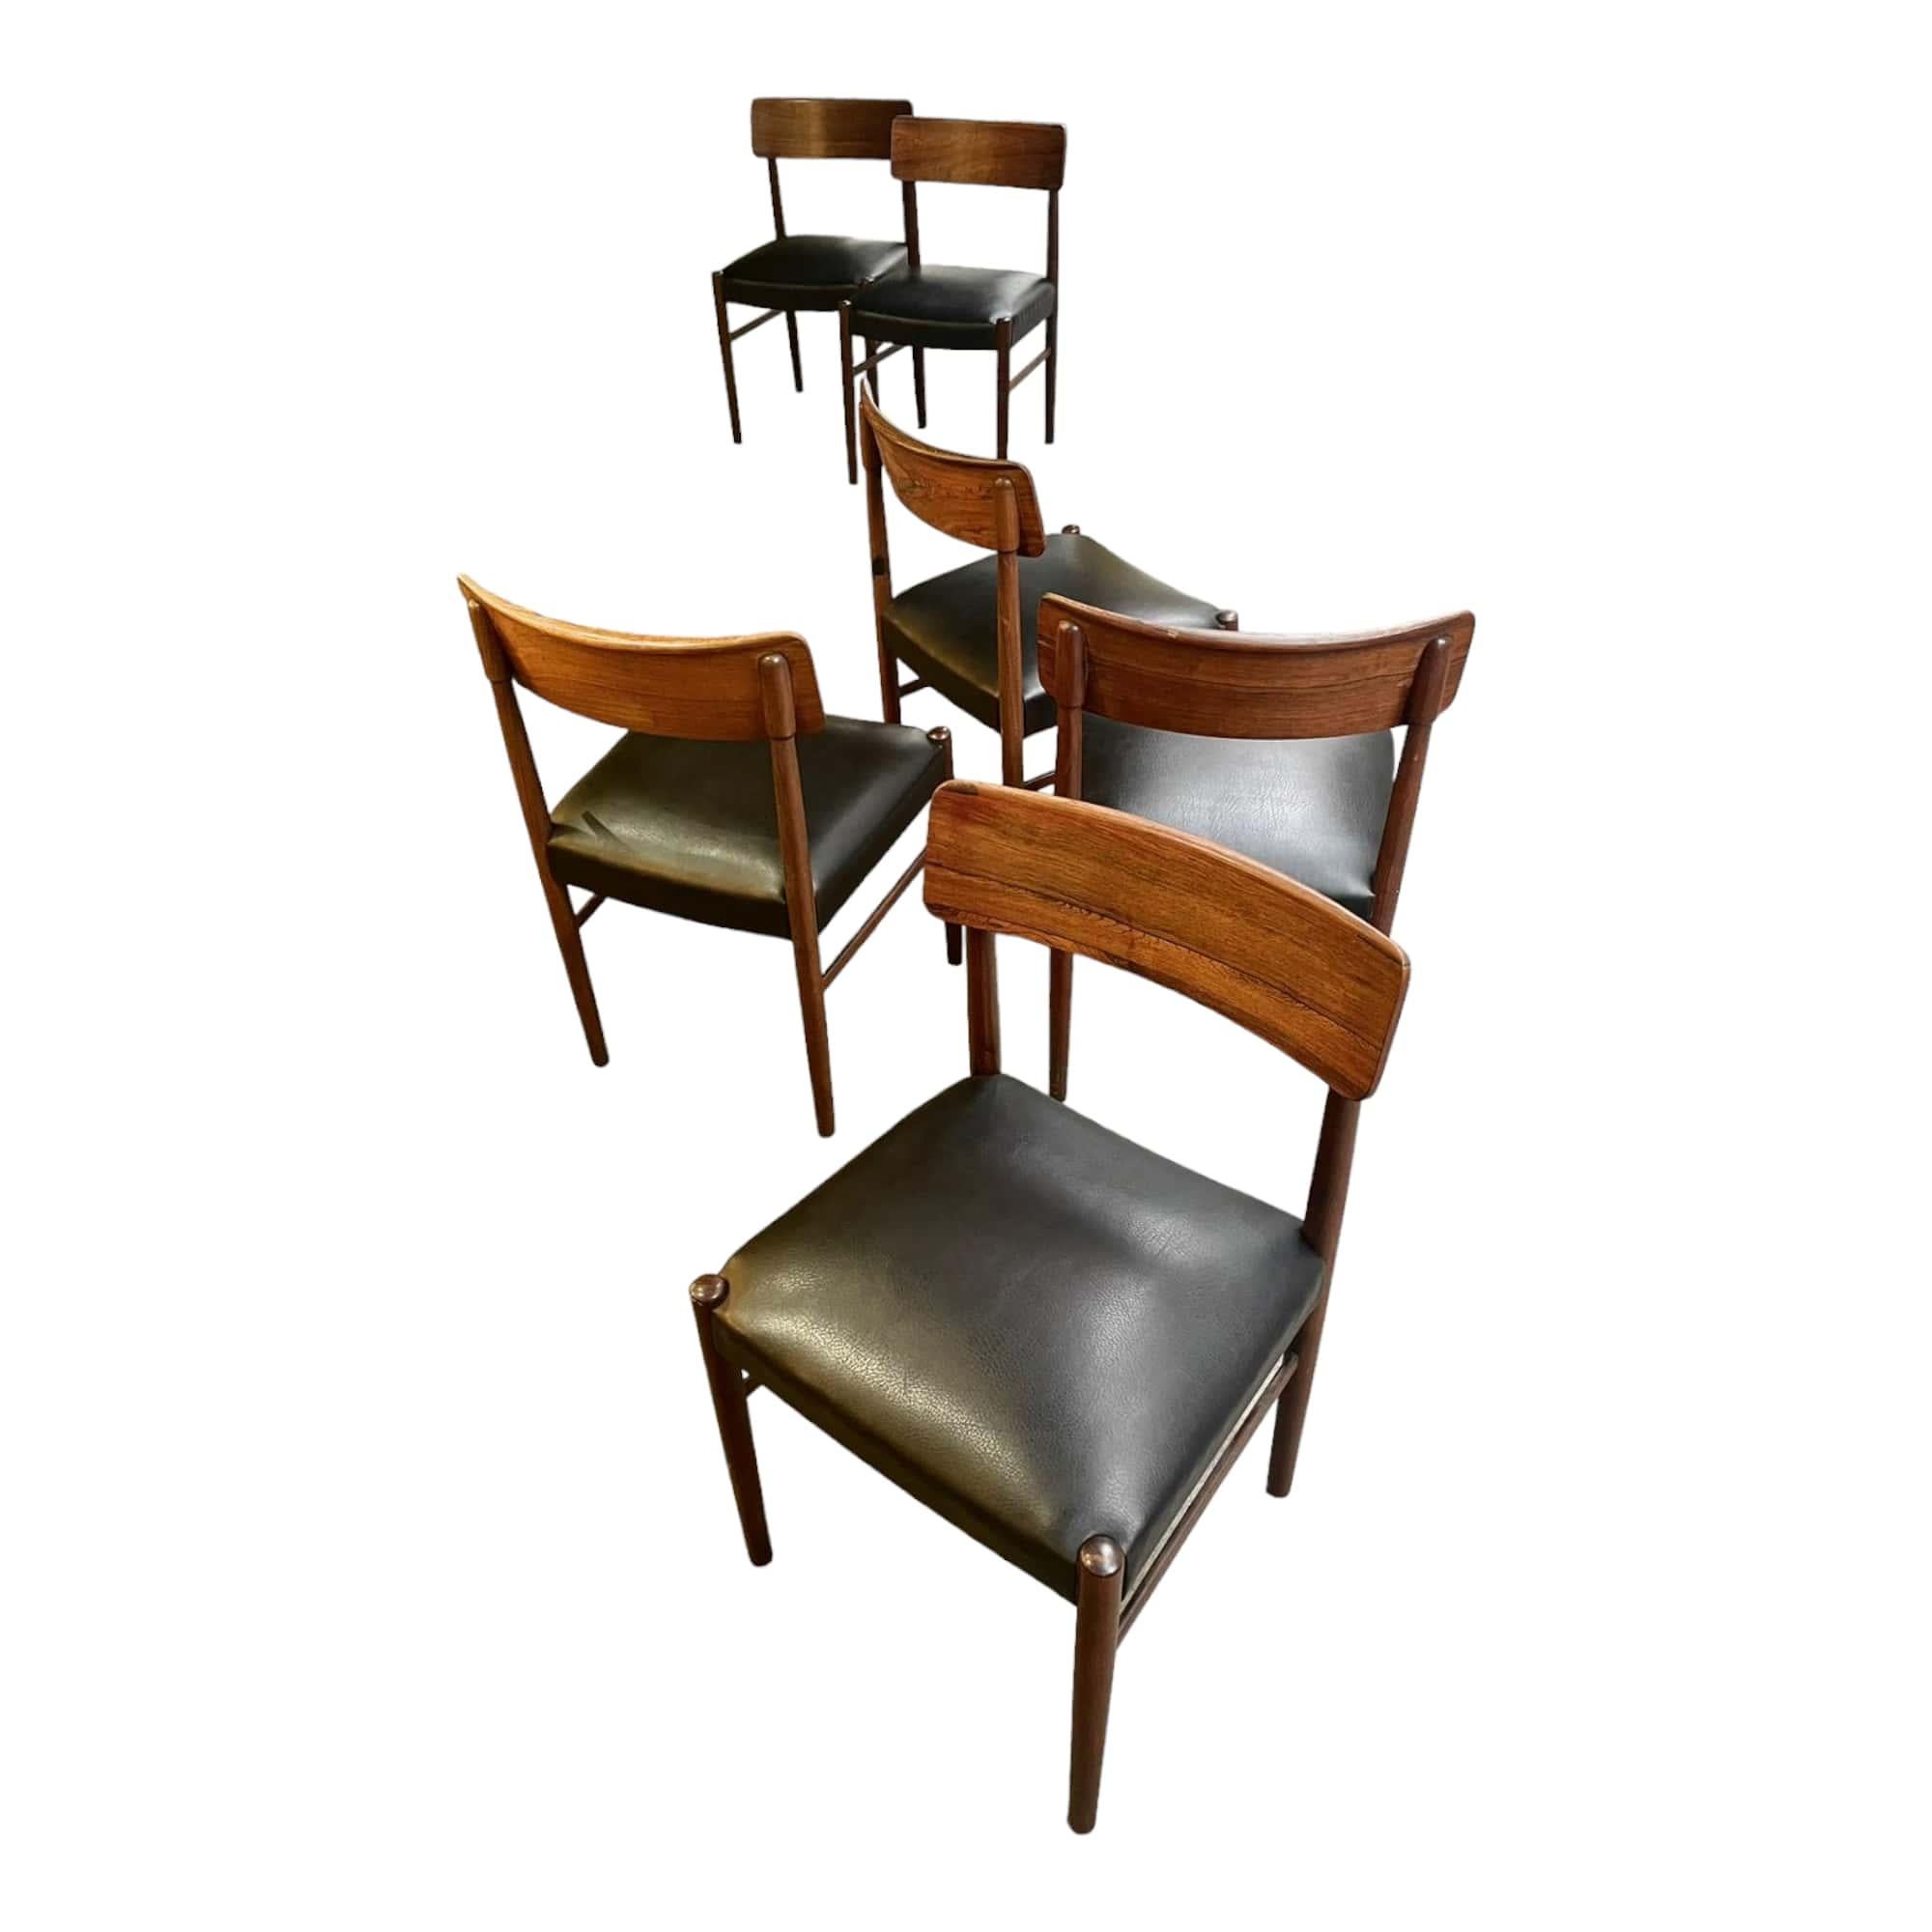 Discover these magnificent Danish chairs dating from the 1950s, a true piece of antique. With a seat height of 45 cm, these chairs offer optimal comfort. Their unique and timeless design makes them a real jewel for your interior. Carefully crafted